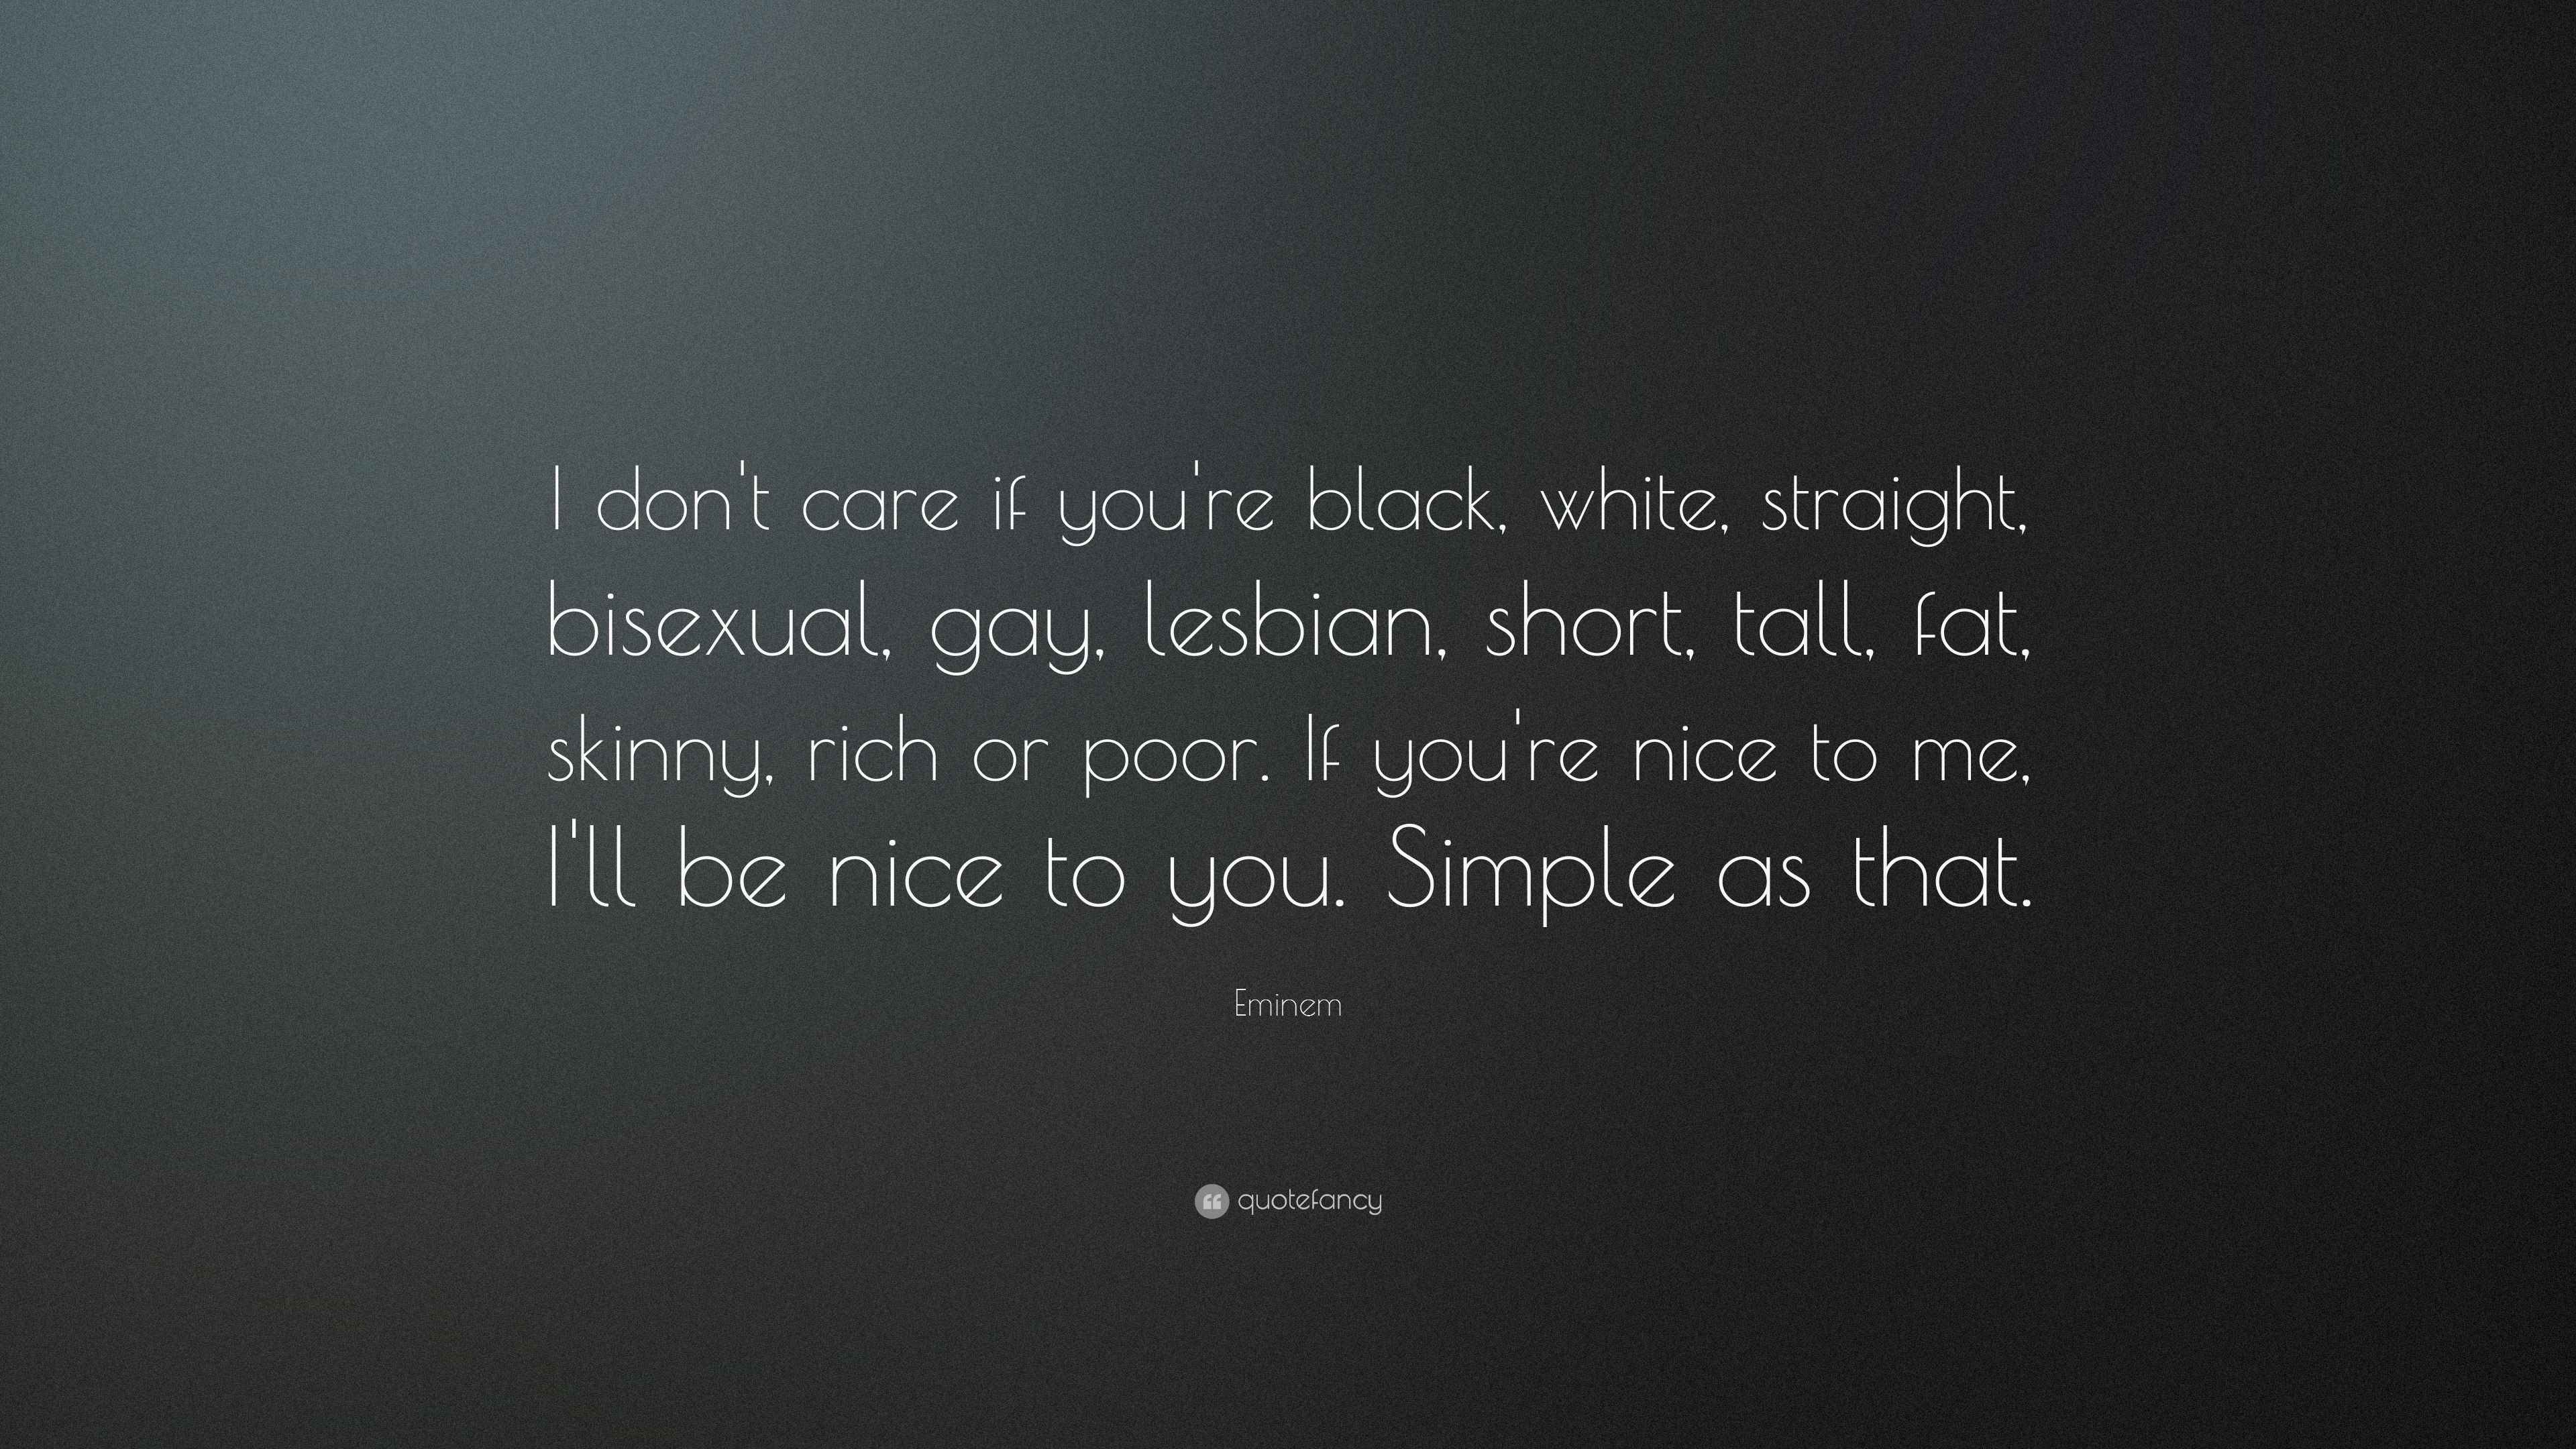 Eminem Quote: “I don't care if you're black, white, straight ...